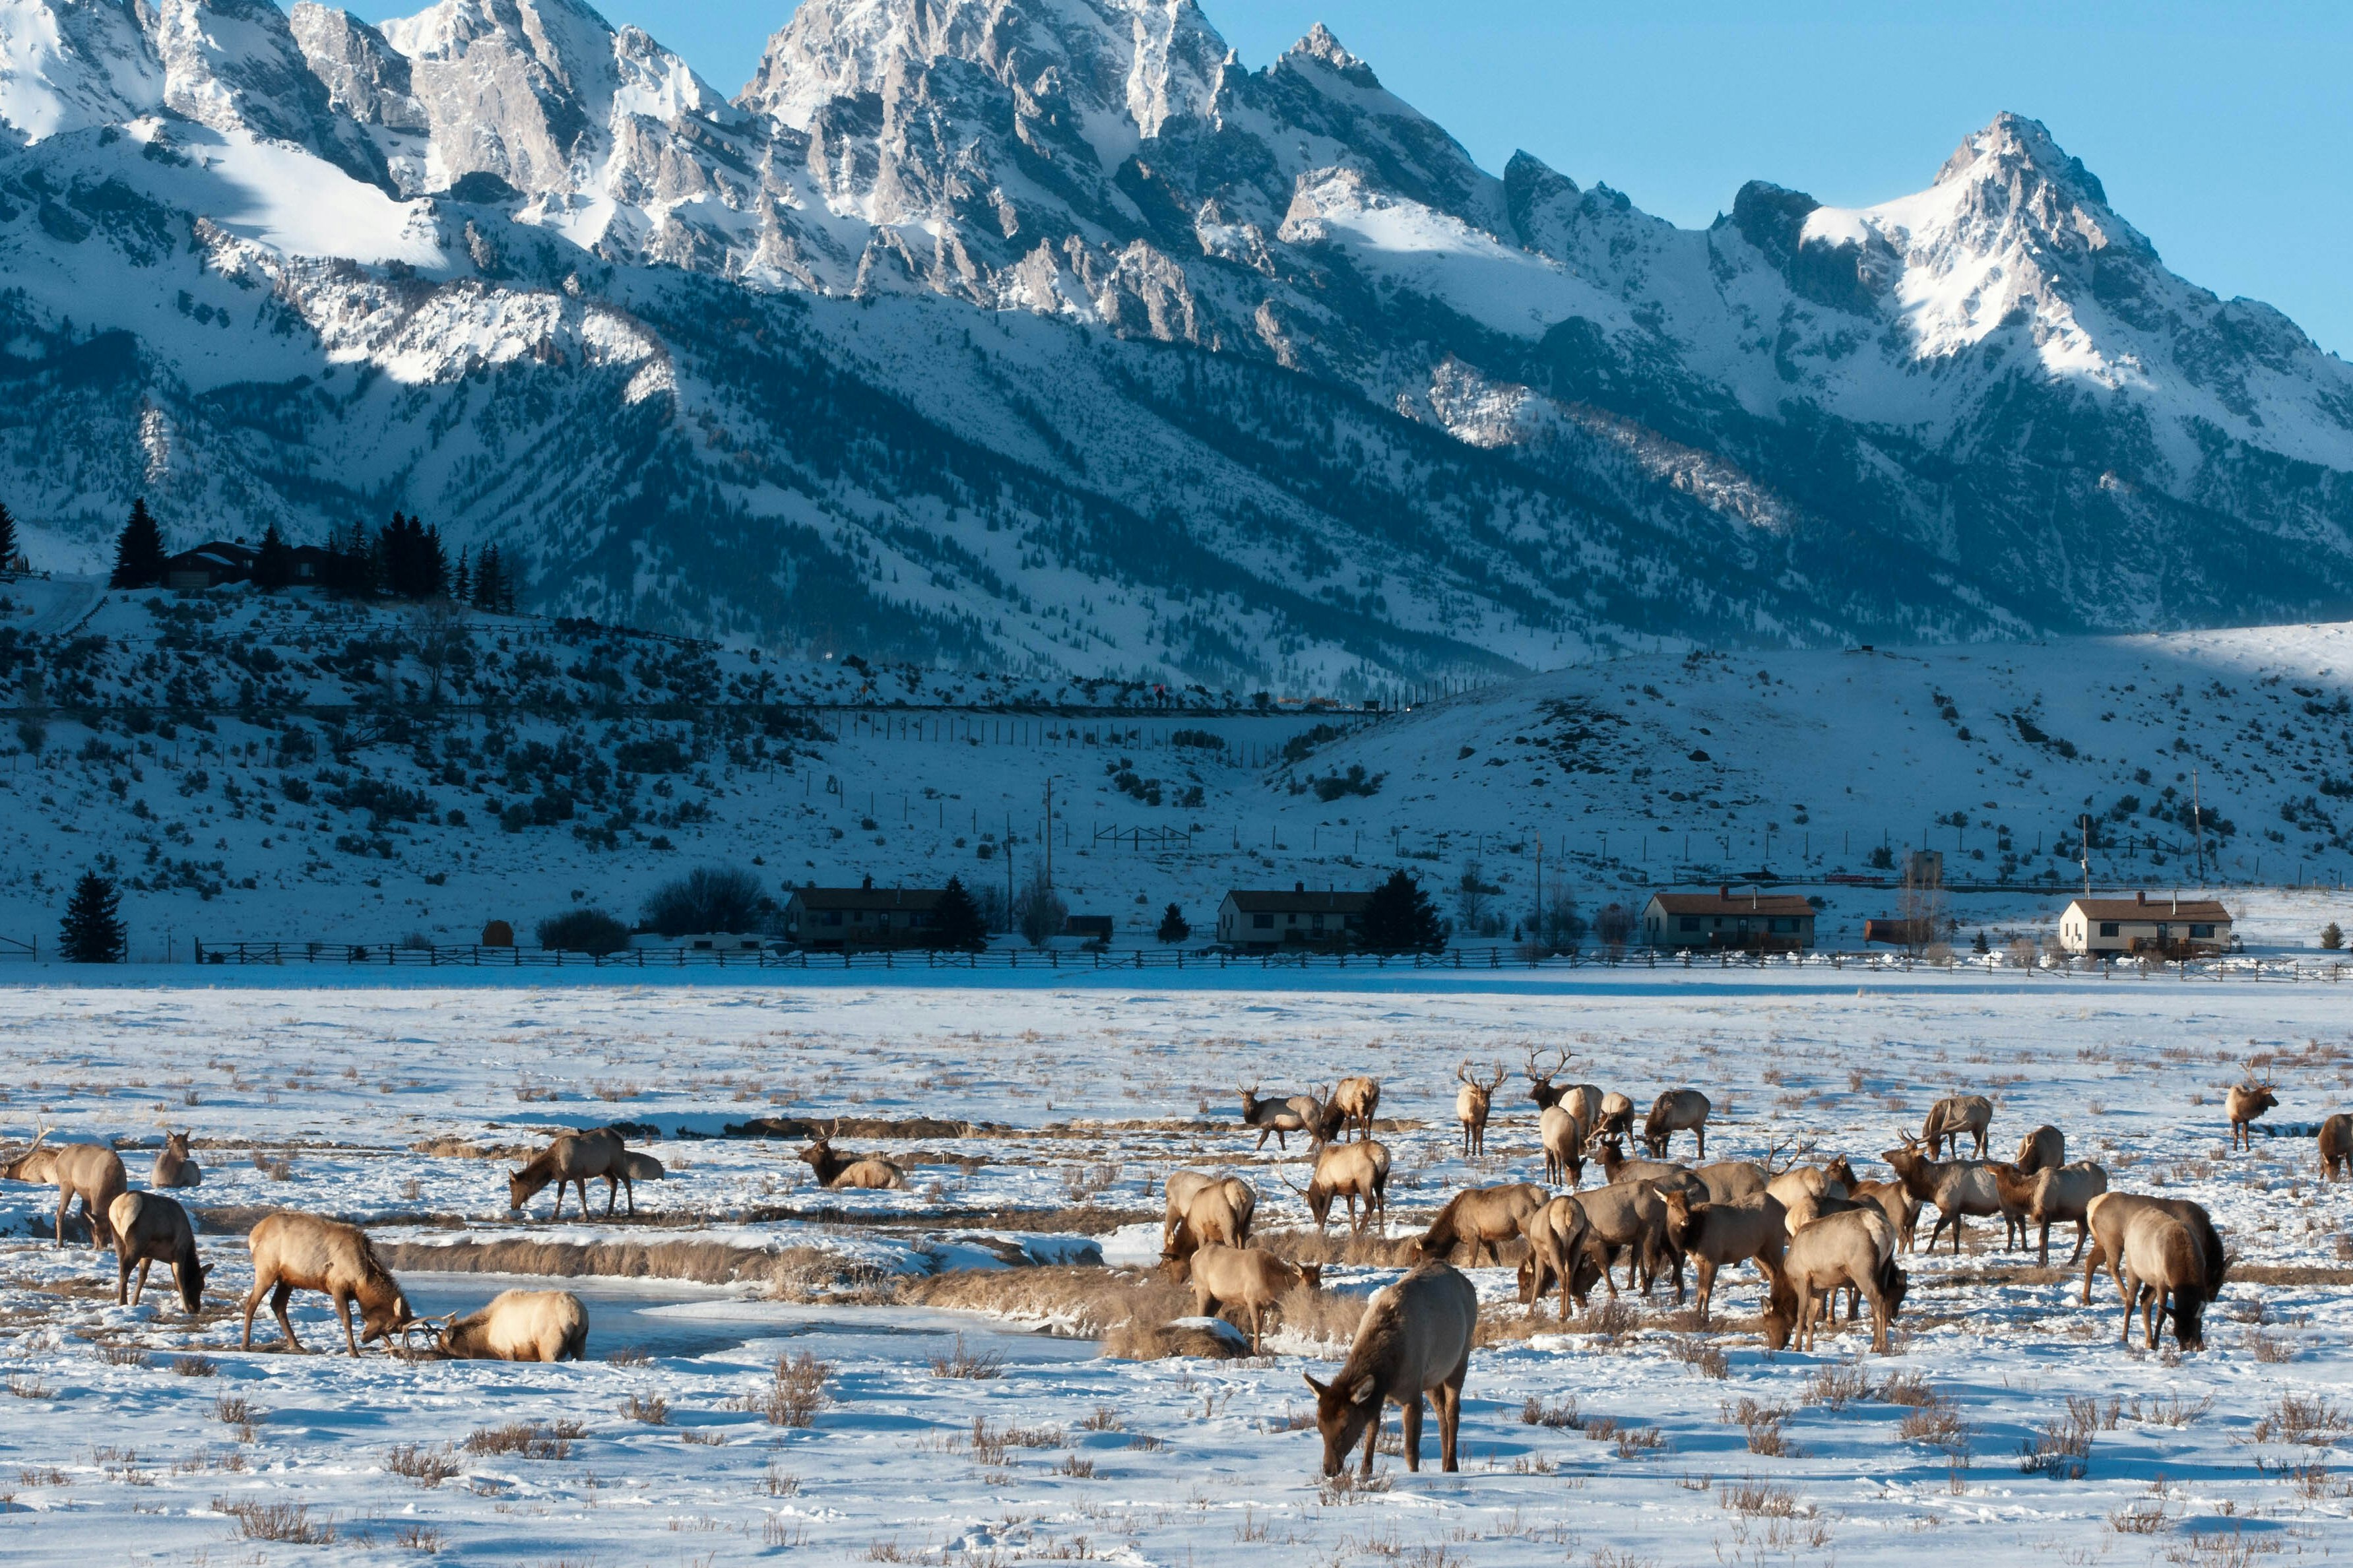 Elk feed in the shadow of the Grand Tetons in Wyoming.